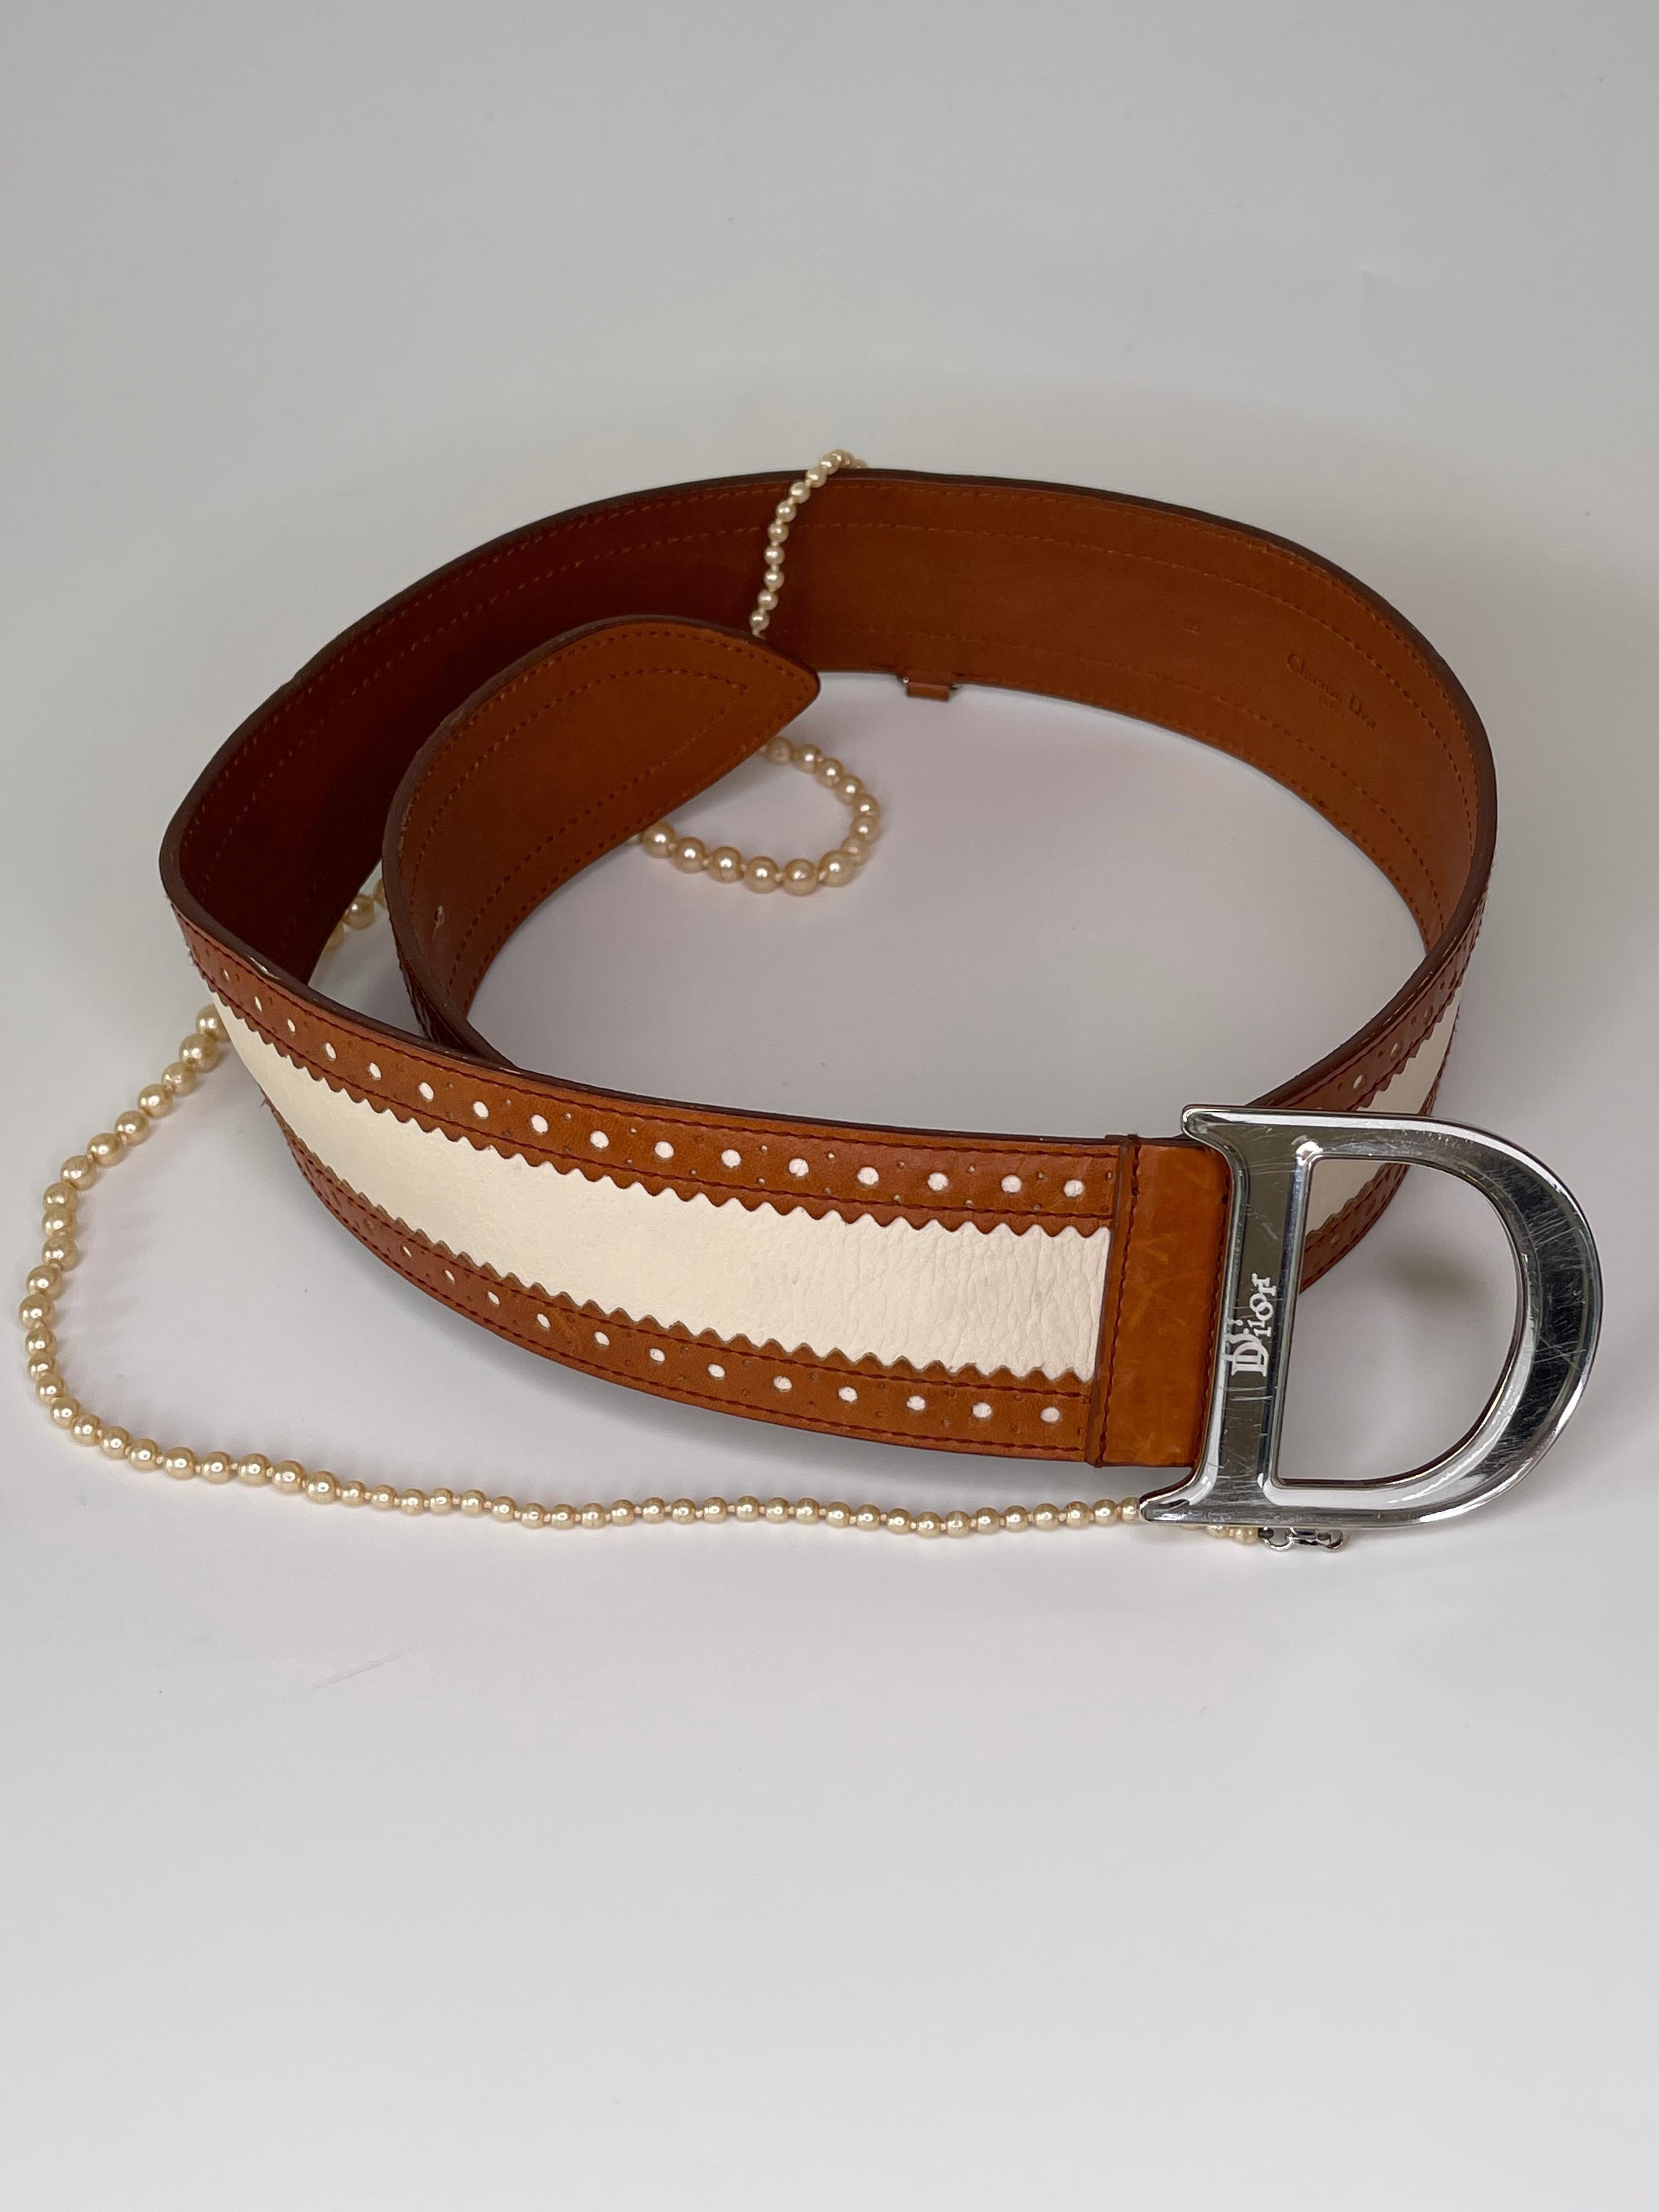 This Dior Detective Pearl Belt consists of a fashionable leather design with a silver mirrored buckle, and a pearl chain attached.

COLOR: Beige, silver mirrored buckle 
MATERIAL: Leather, faux pearl chain
ITEM CODE: 15 BM-0054
MEASURES: L 37” x W